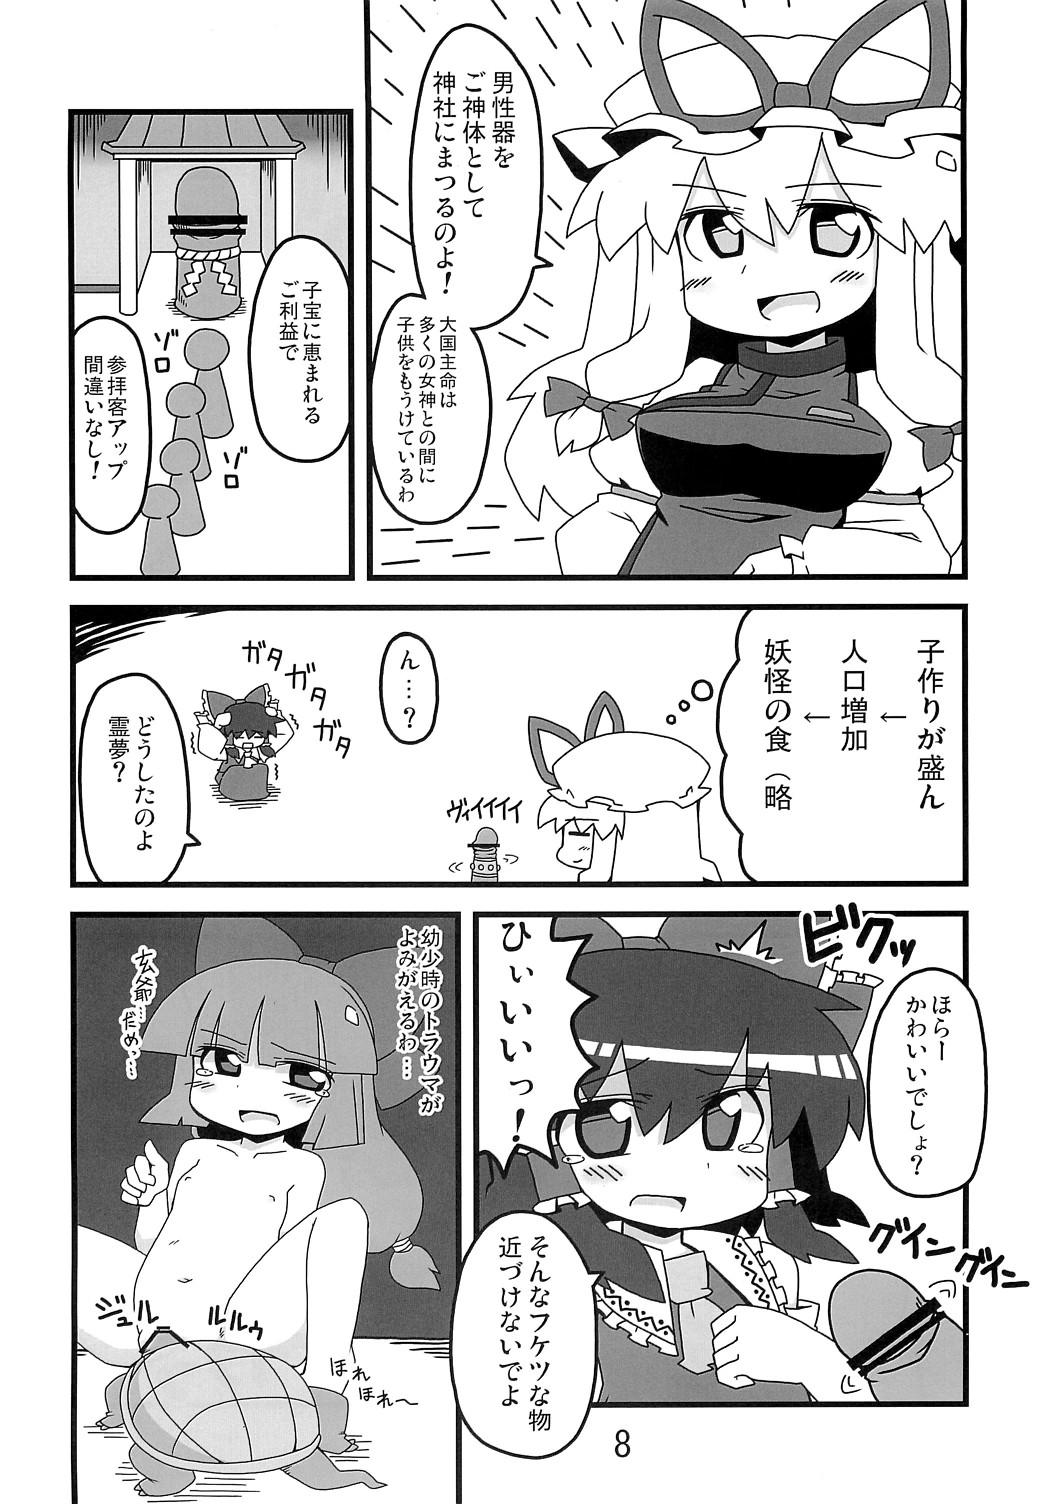 Teenager 東方豊年祭 - Touhou project Tamil - Page 7